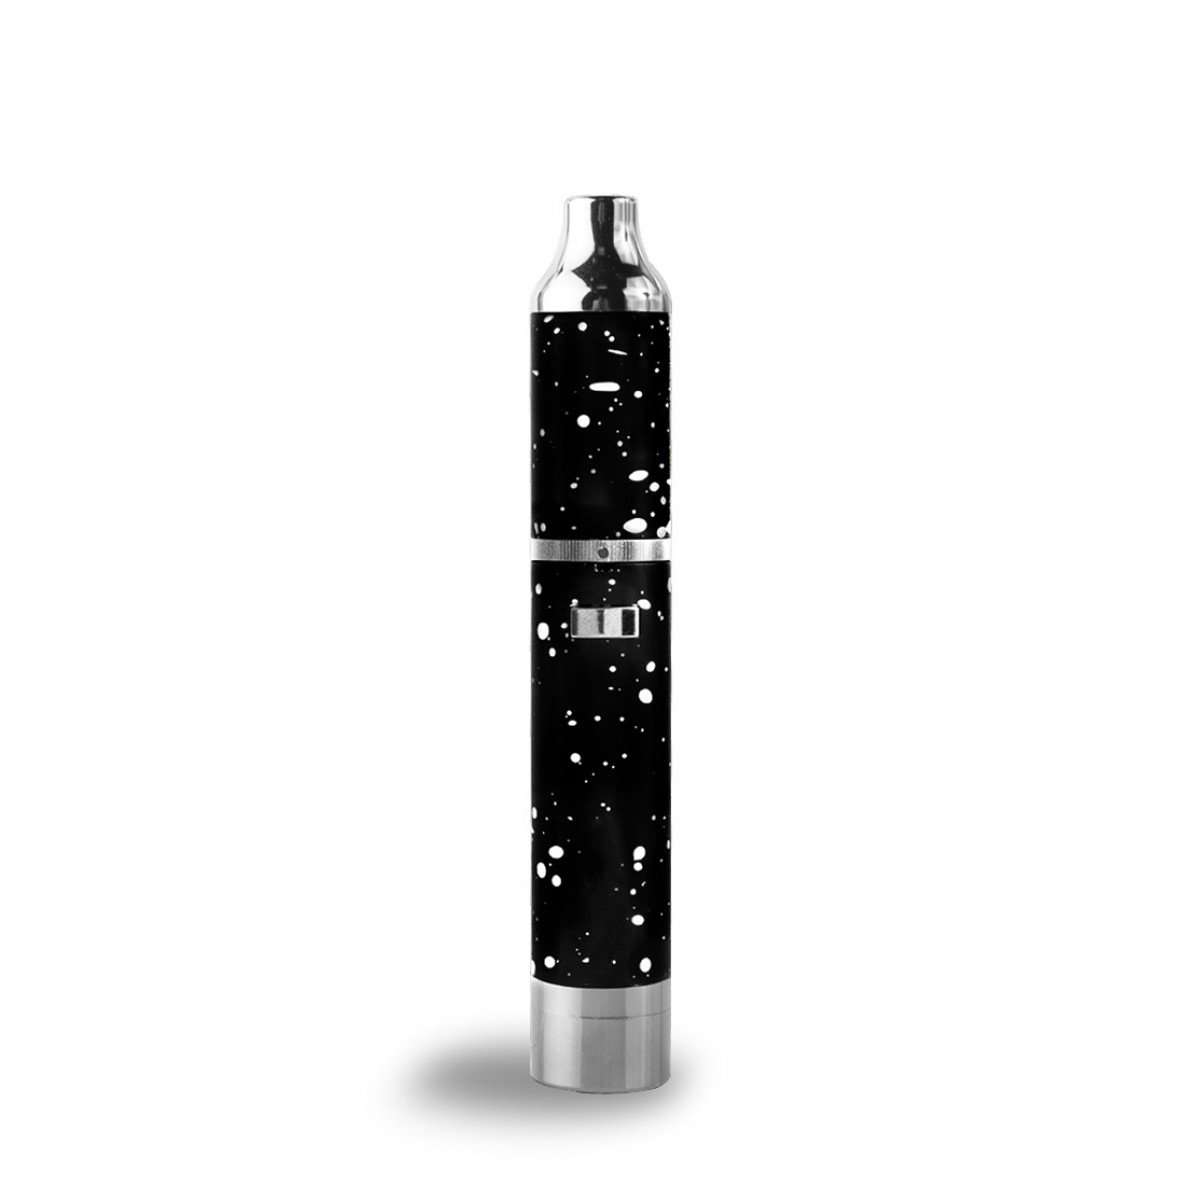 Evolve Plus Concentrate Vaporizer by Wulf Mods